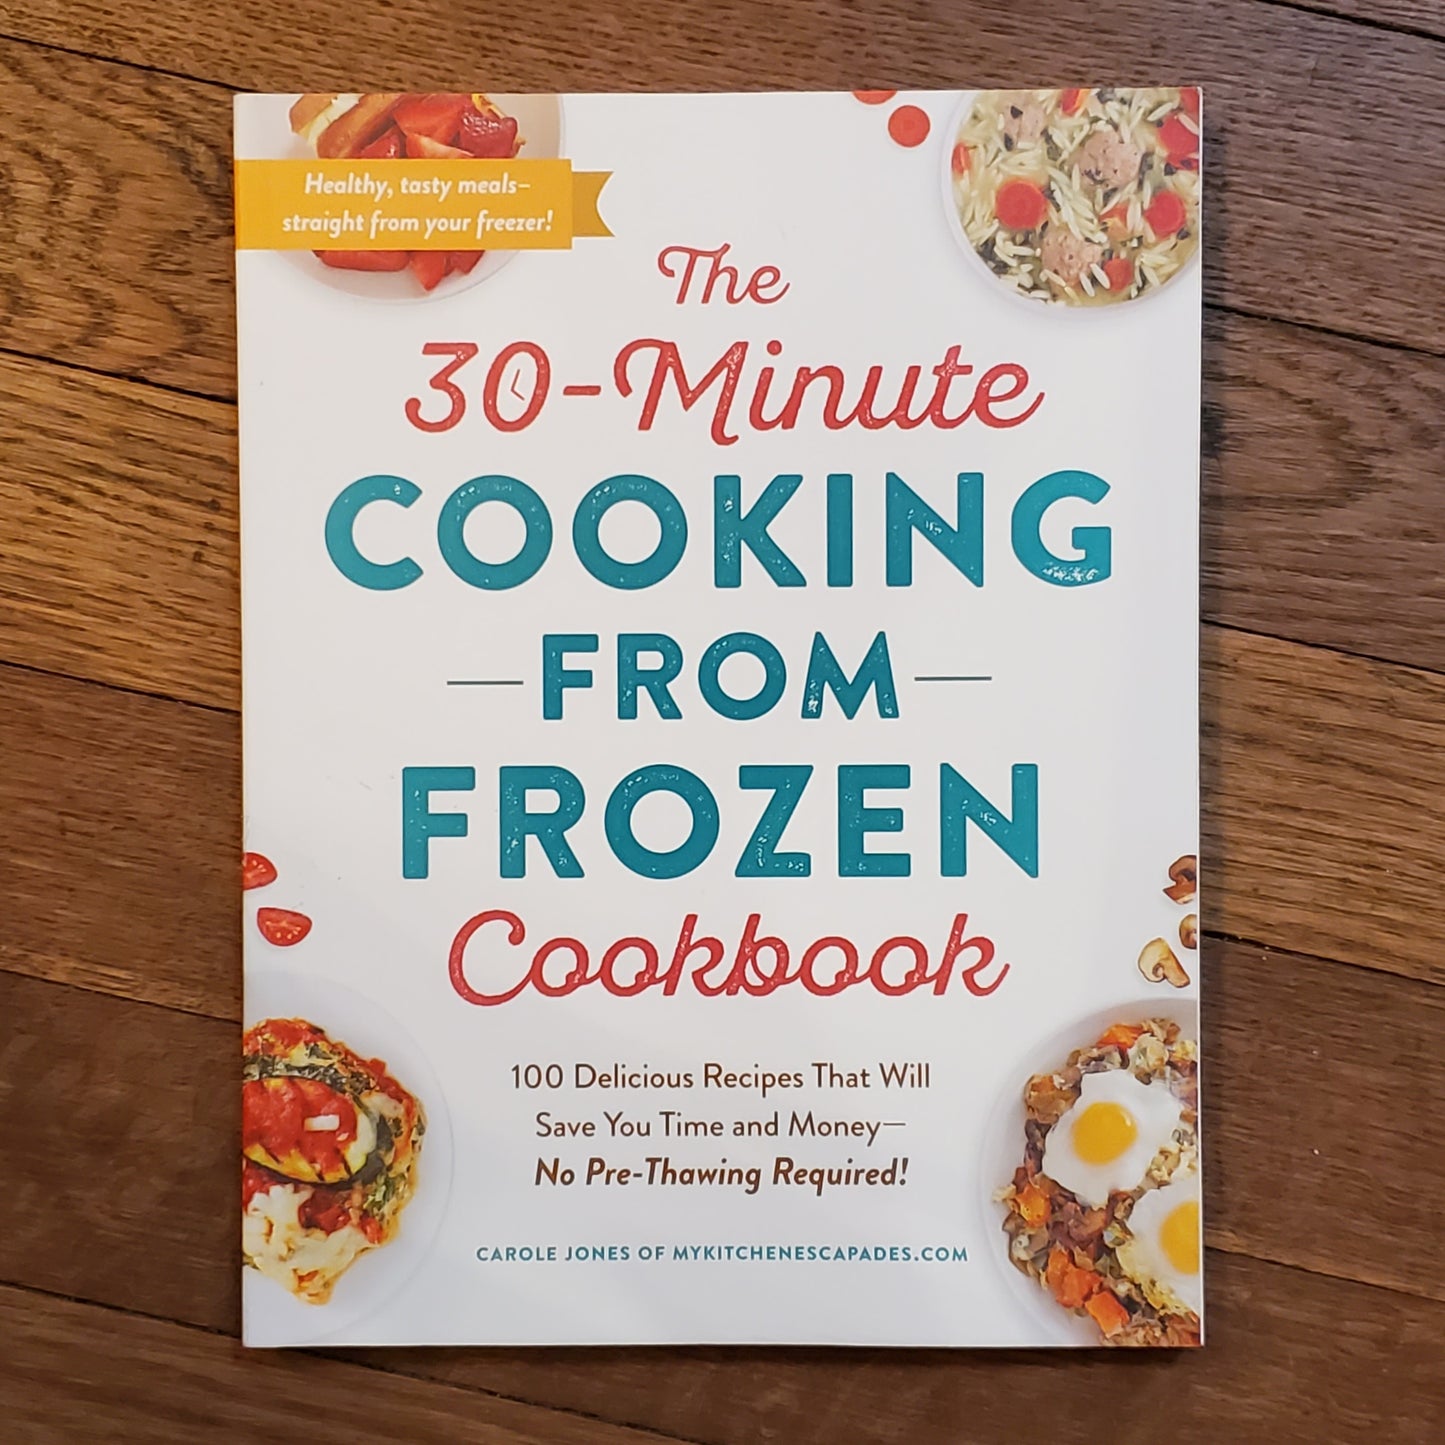 The 30-Minute Cooking from Frozen Cookbook